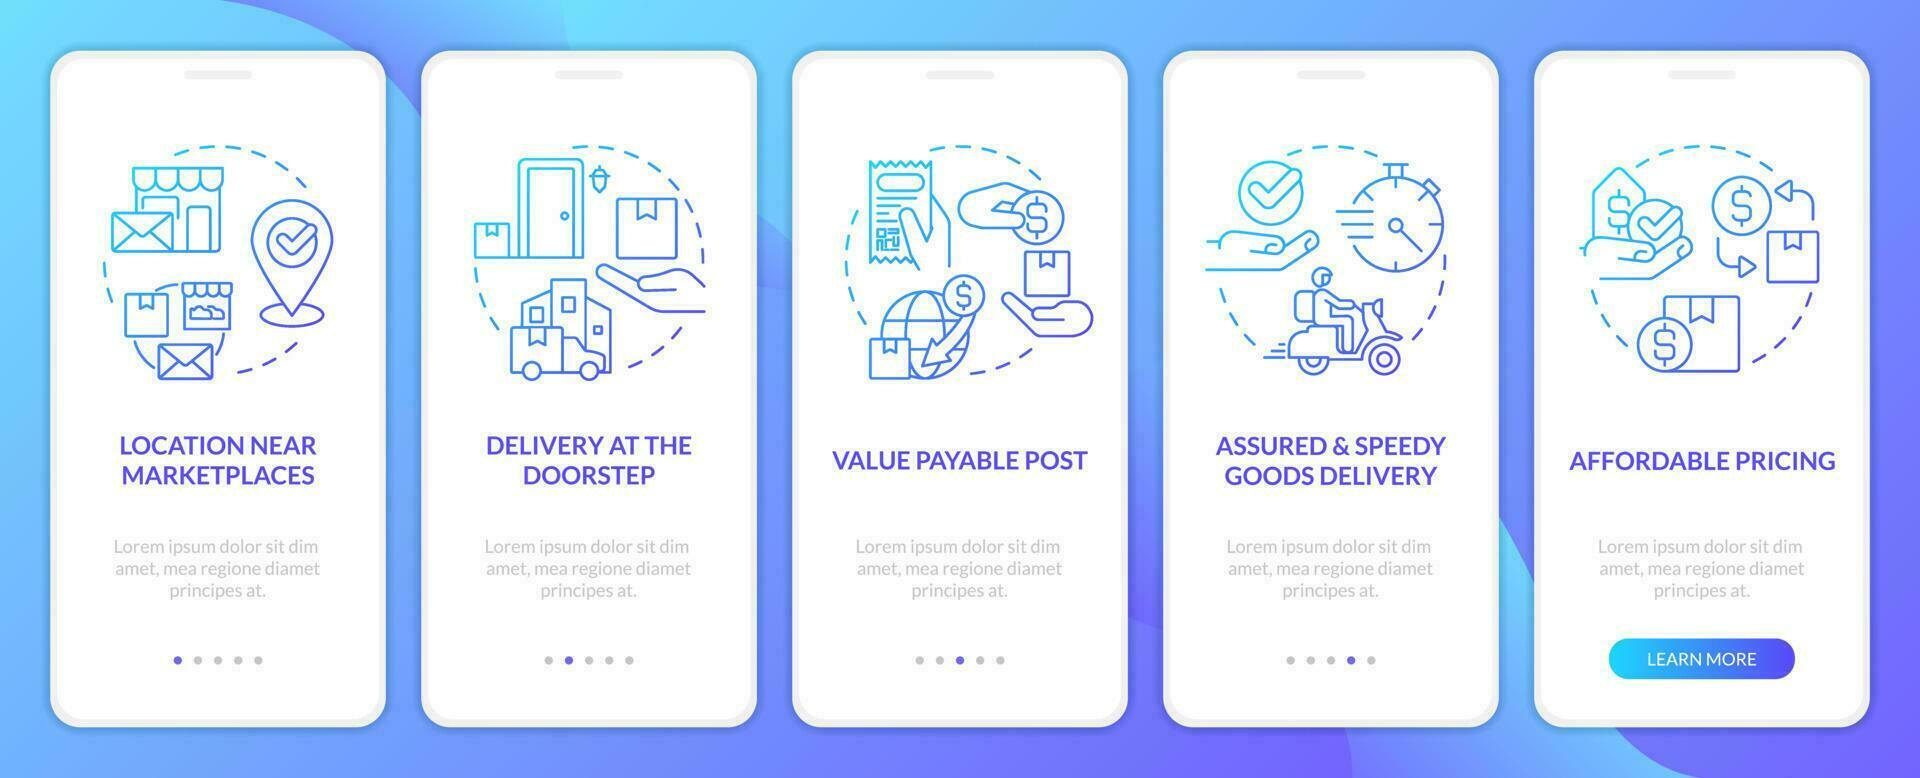 Postal service pros blue gradient onboarding mobile app screen. Walkthrough 5 steps graphic instructions with linear blue gradient concepts. UI, UX, GUI template vector